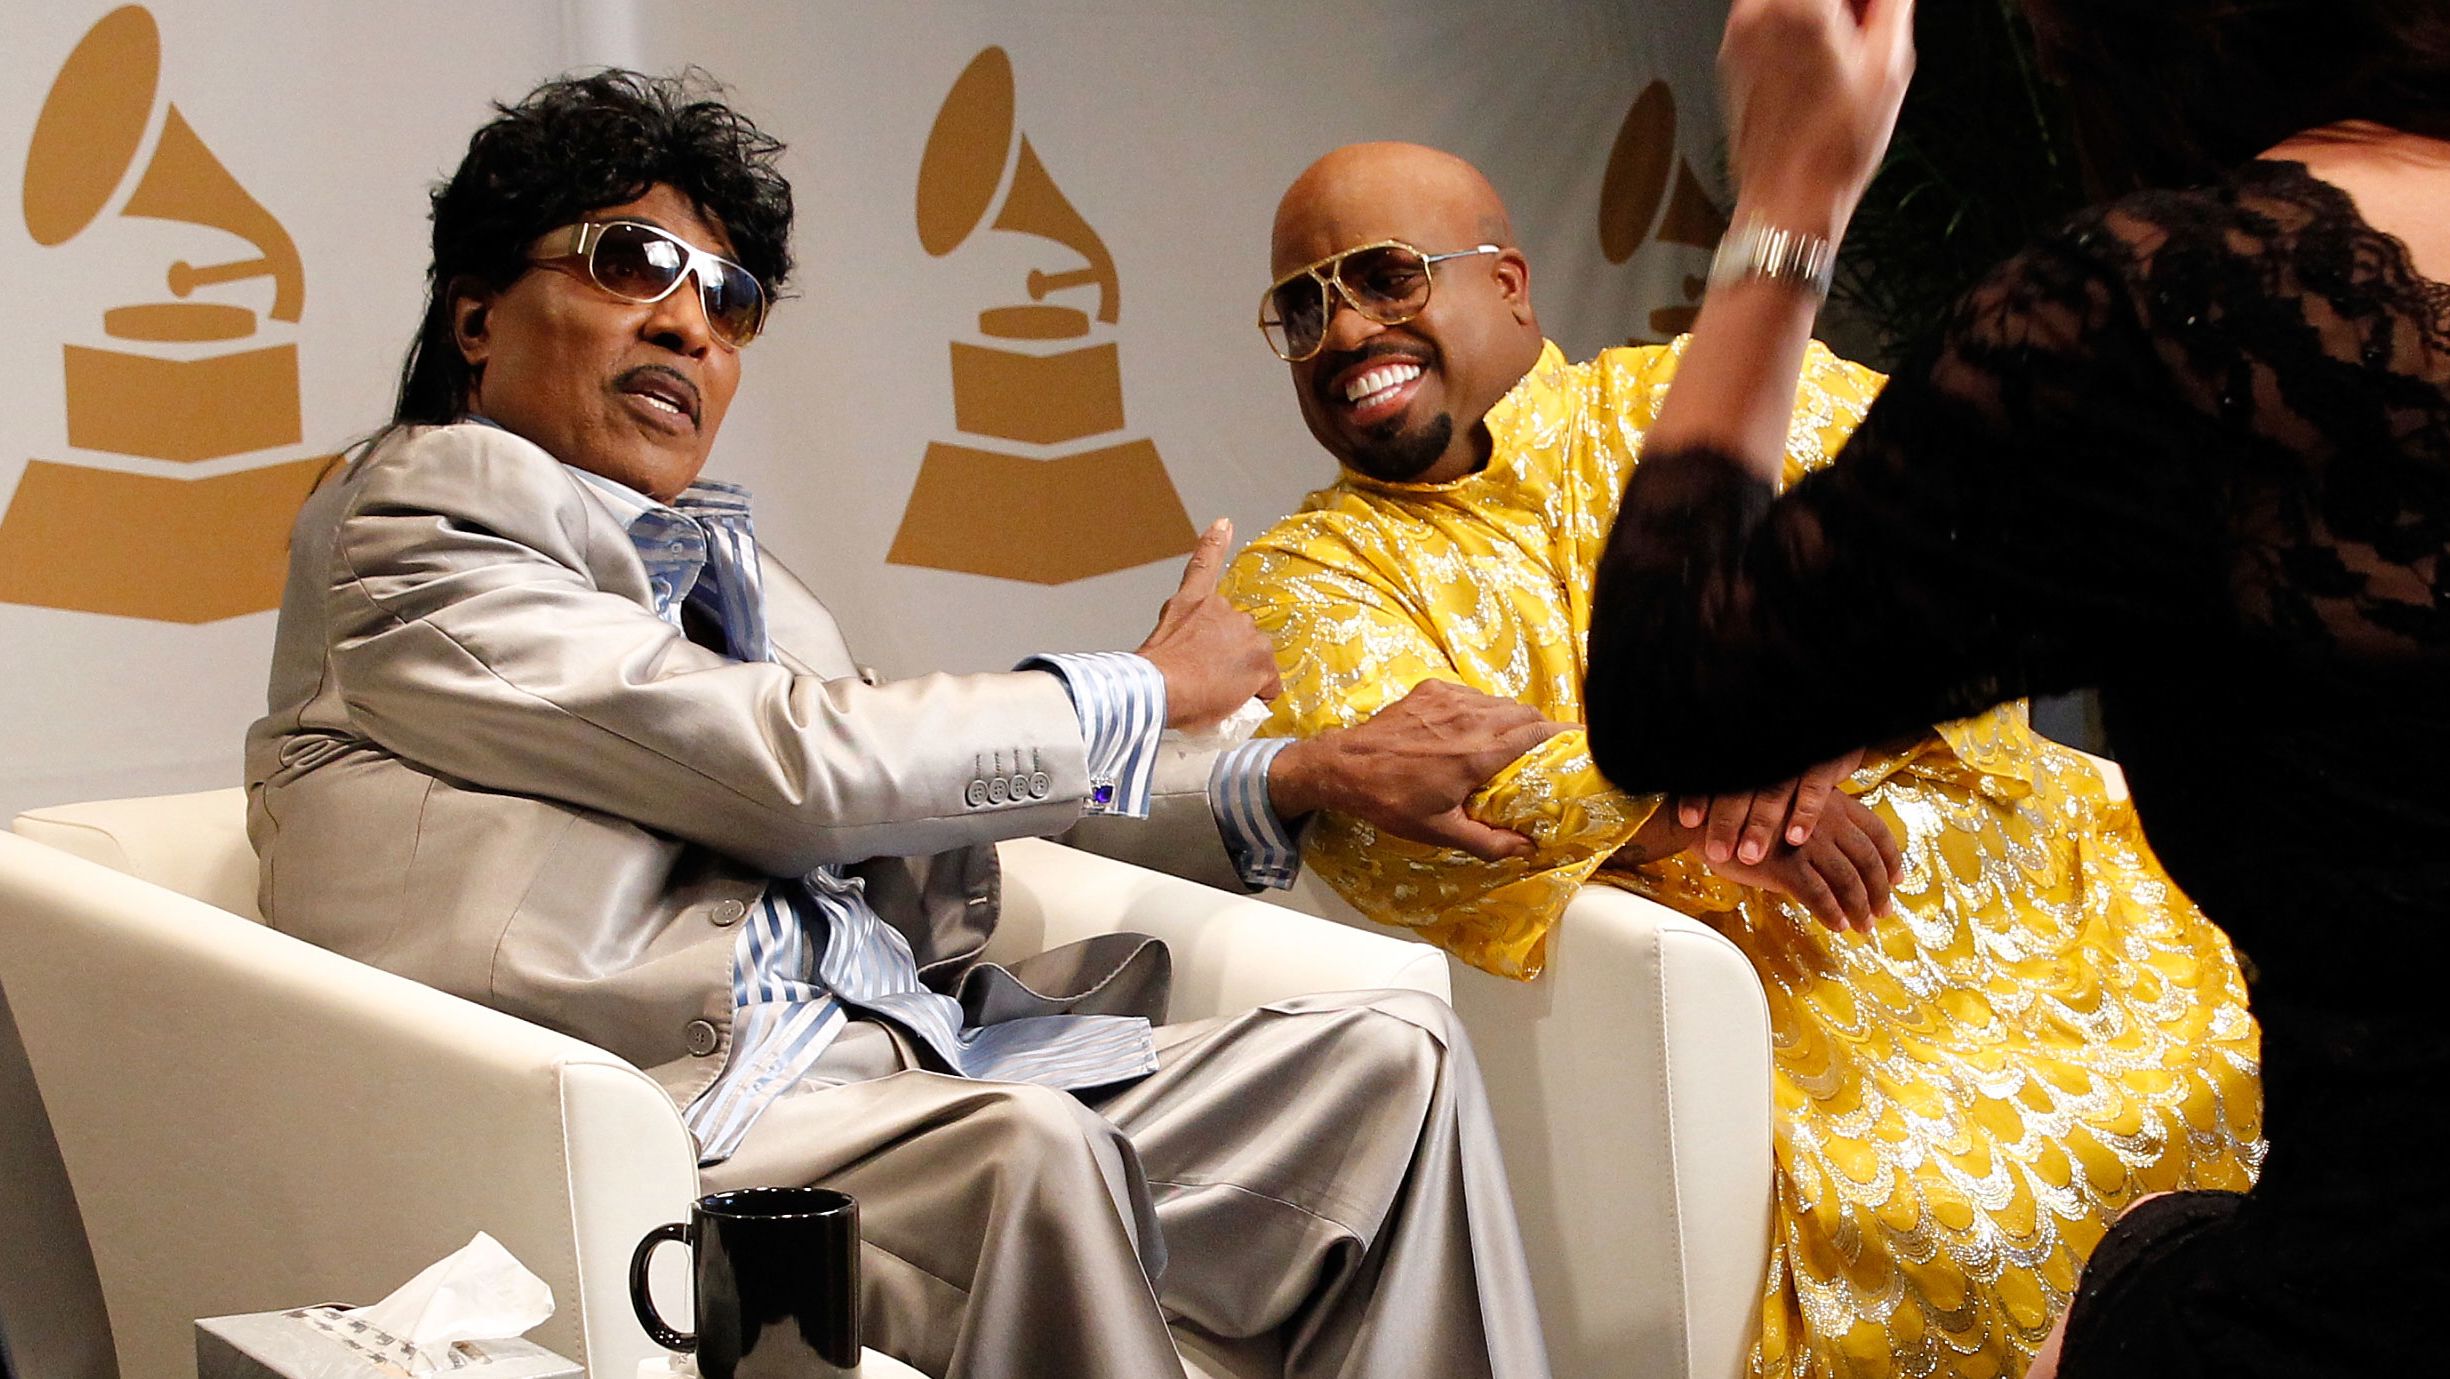 Little Richard and CeeLo Green speak during an event in Atlanta in 2013.